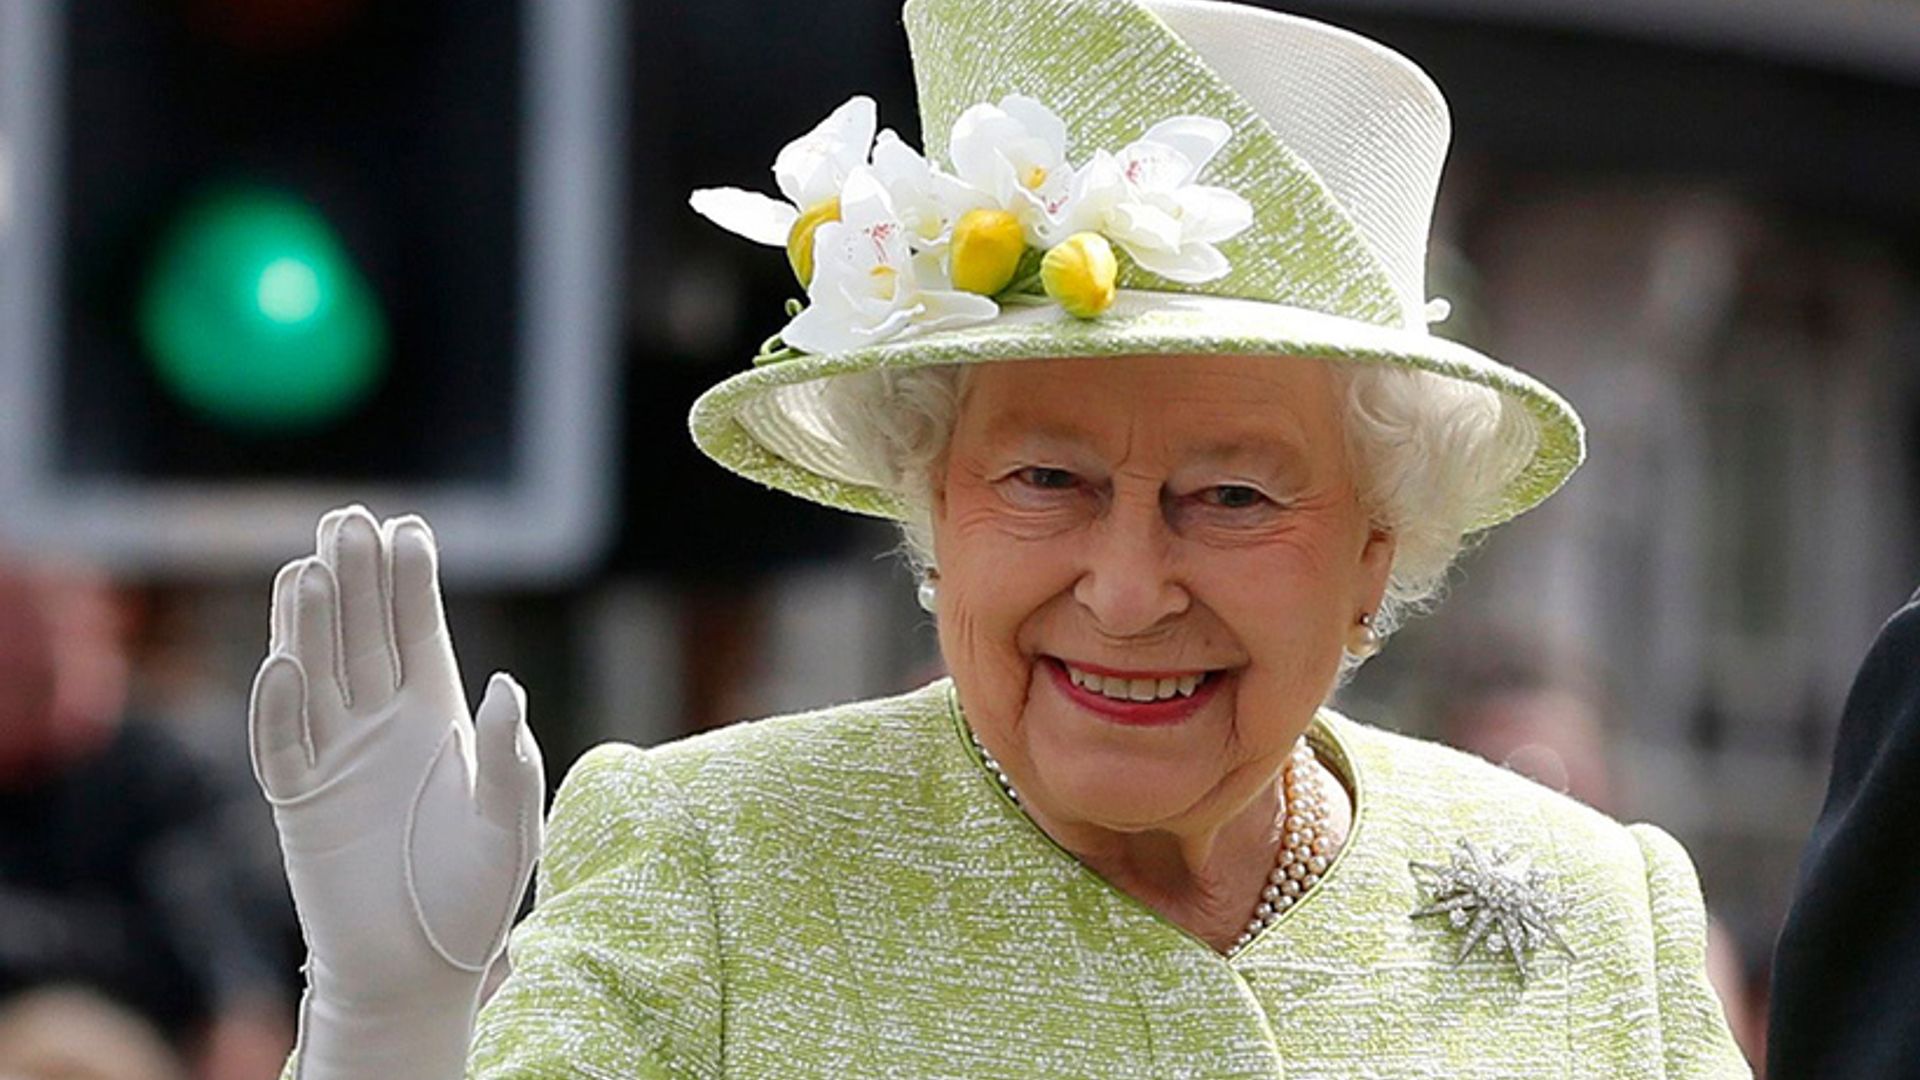 The Queen's glove maker reveals why her Majesty always wears the chic accessory